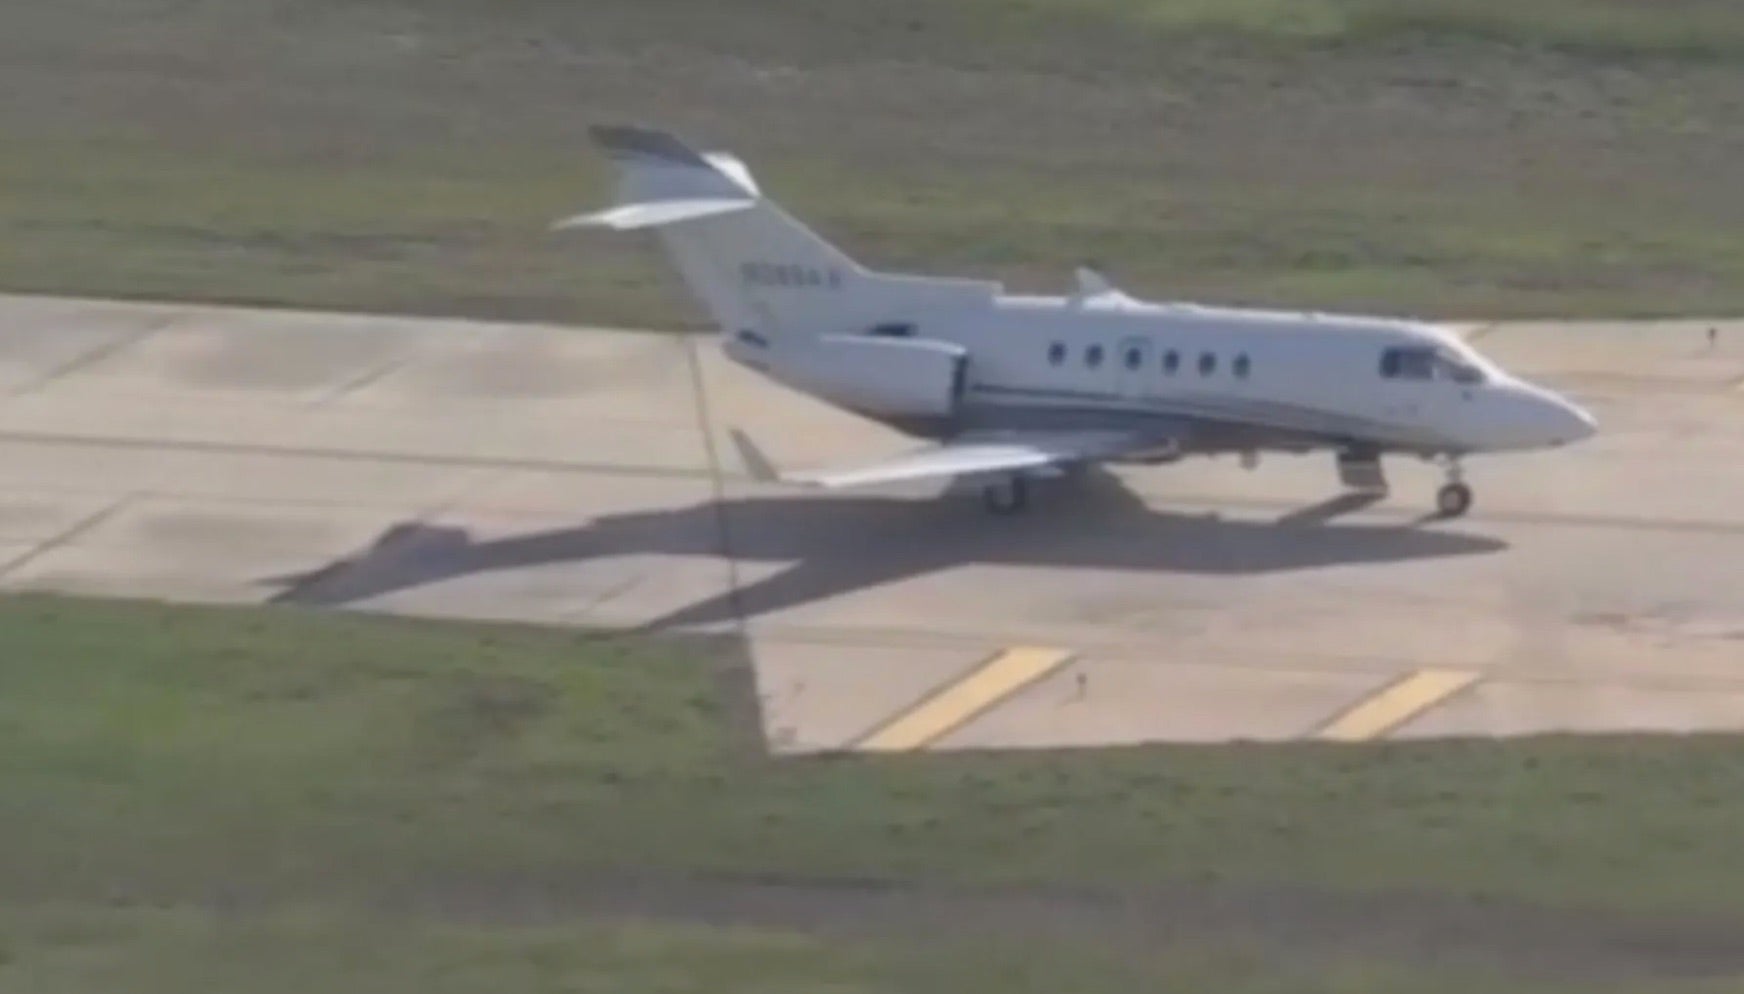 Two private jets clipped wings as they were moving on the airfield